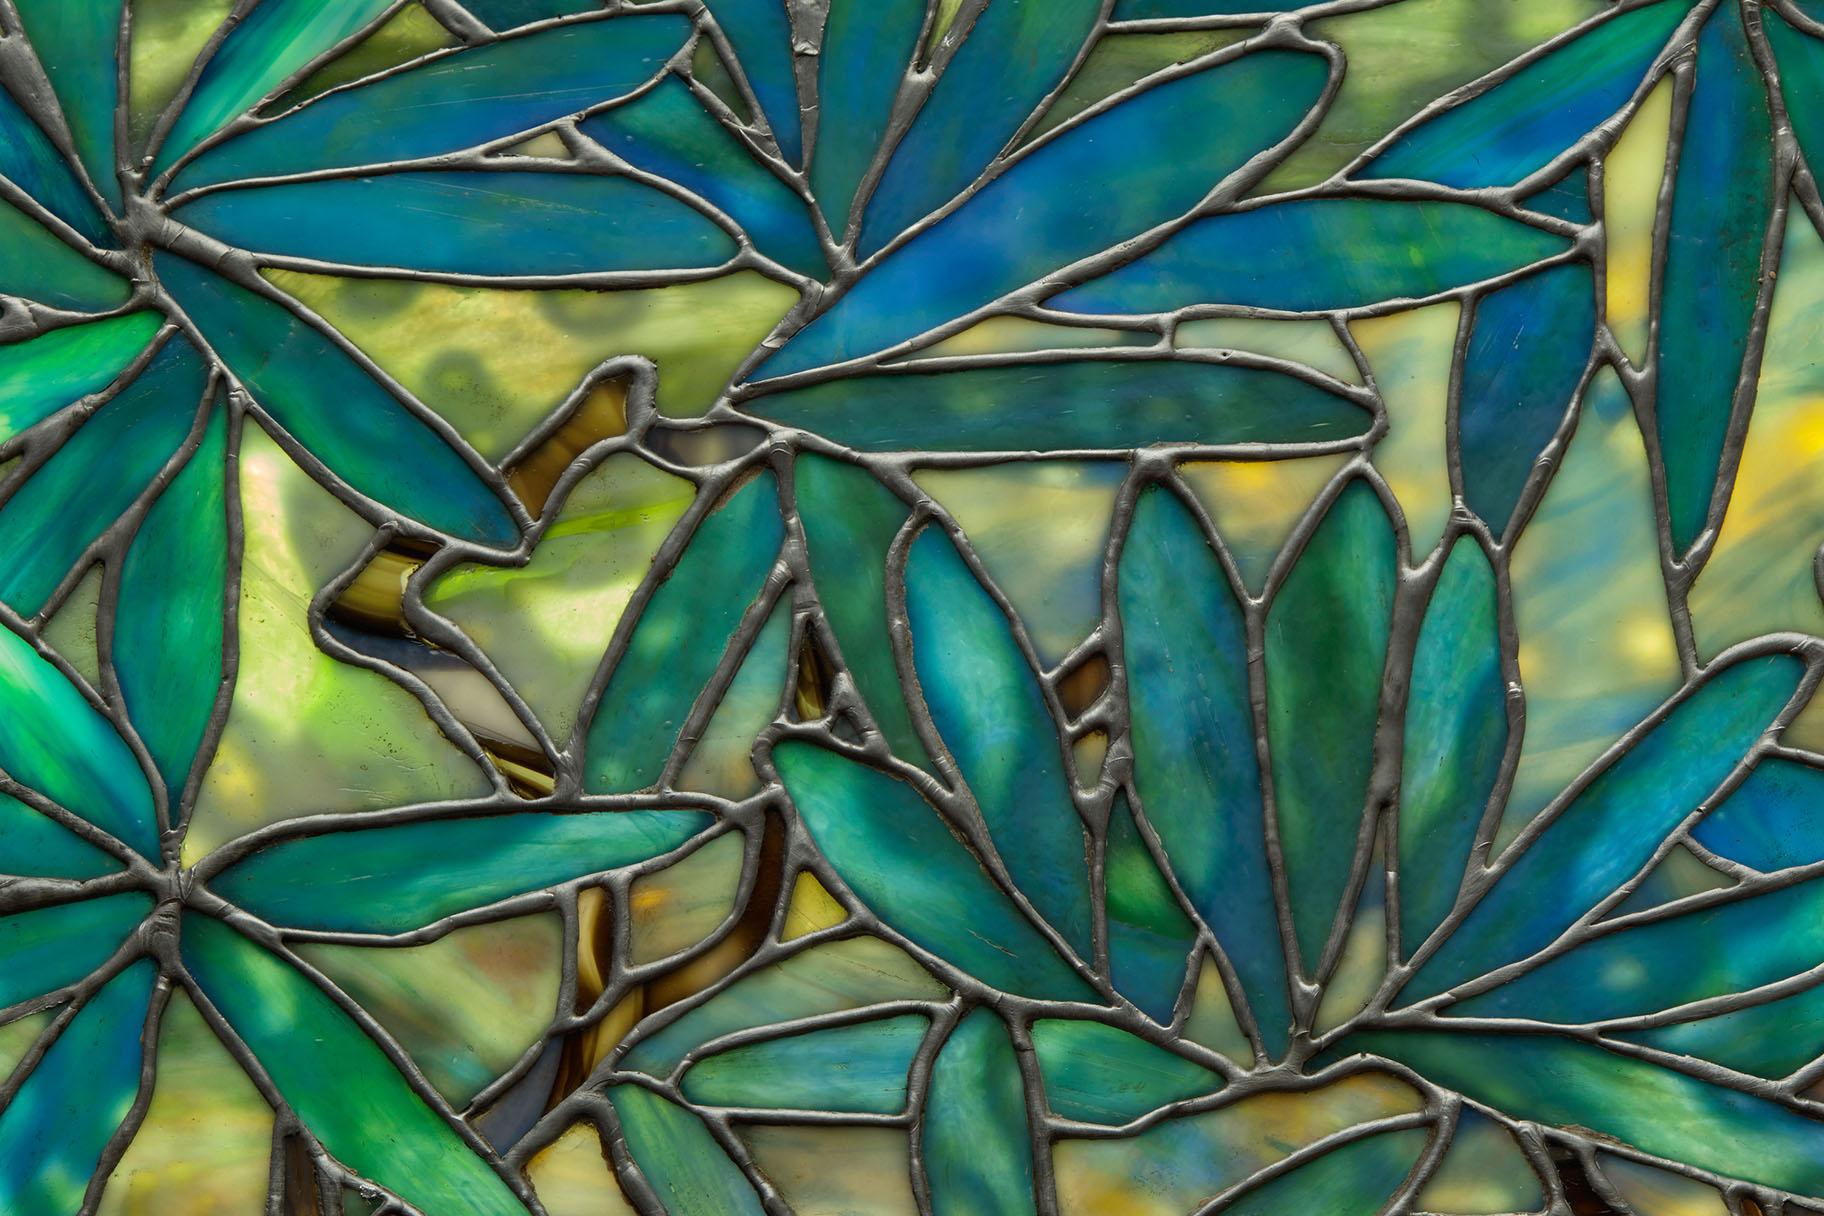 Design attributed to Agnes F. Northrop (American, 1857–1953), Tiffany Studios (American, 1902–32) Corona, New York. Hartwell Memorial Window (detail), 1917. (Courtesy of The Art Institute of Chicago)